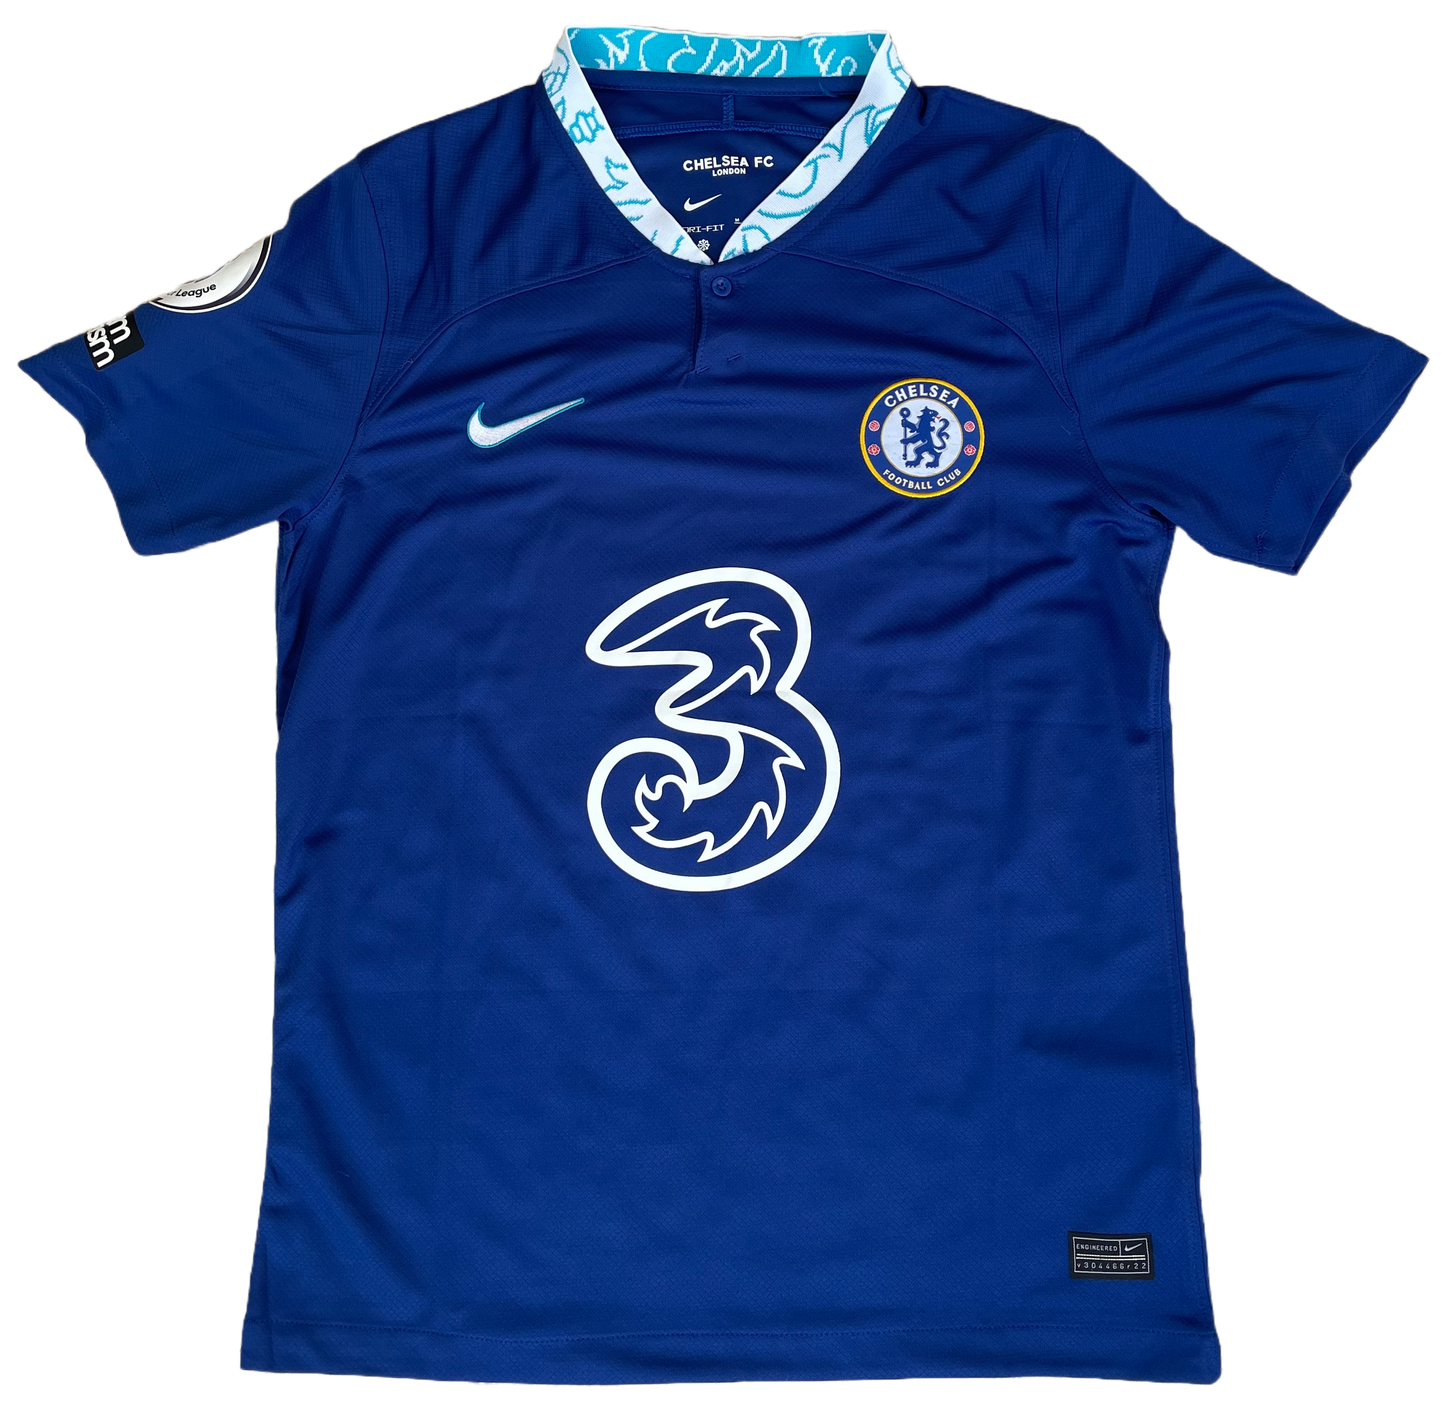 Signed Mount Chelsea Home Shirt 22/23 (Smudge)